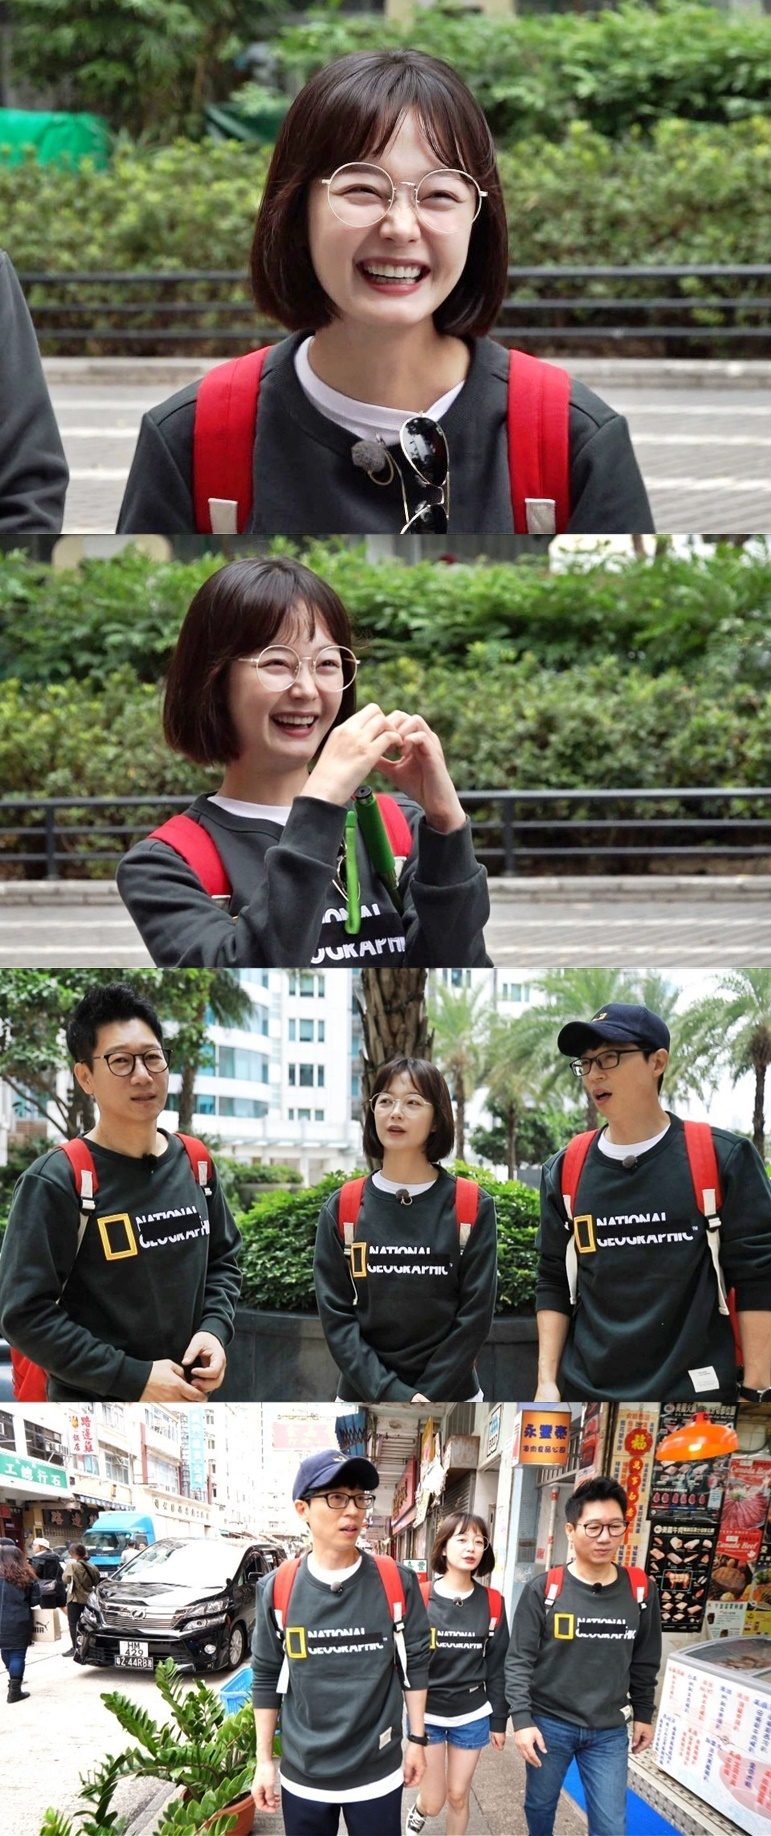 Seoul) = Actor Jeon So-min revealed his heart for marriage.SBS Running Man, which will be broadcast on the 16th, will be decorated with the second Mission Year-end Settlement Race, which collects all of the Global Failure Missions and re-challenges, and the commission challenge of Yoo Jae-Suk X Ji Suk-jin X Jeon So-min team will be unveiled.Earlier, they hoped to succeed in Hong Kongs various food, but after Okinawa cotton hell, they fell into Hong Kong cotton hell and gave a big smile. Jeon So-min found Newlyweds who took a wedding shoot during the mission.Jeon So-min looked at Newlyweds who had no intention of wedding photography with a happy expression and suddenly shouted I want to marriage and embarrassed Ji Suk-jin and Yoo Jae-Suk.Jeon So-min said, I wished to be lucky because I could not marriage in Running Man.I do not think I can marriage, he laughed with a painful confession.The three men, meanwhile, faced another crisis because of a new mission that reminded them of hell more than silver hell.Yoo Jae-Suk X Ji Suk-jin X Jeon So-min, a trio of Hong Kong trio, can be seen on Running Man, which is broadcasted at 4:50 pm on the day, whether he will be able to return to Korea safely.